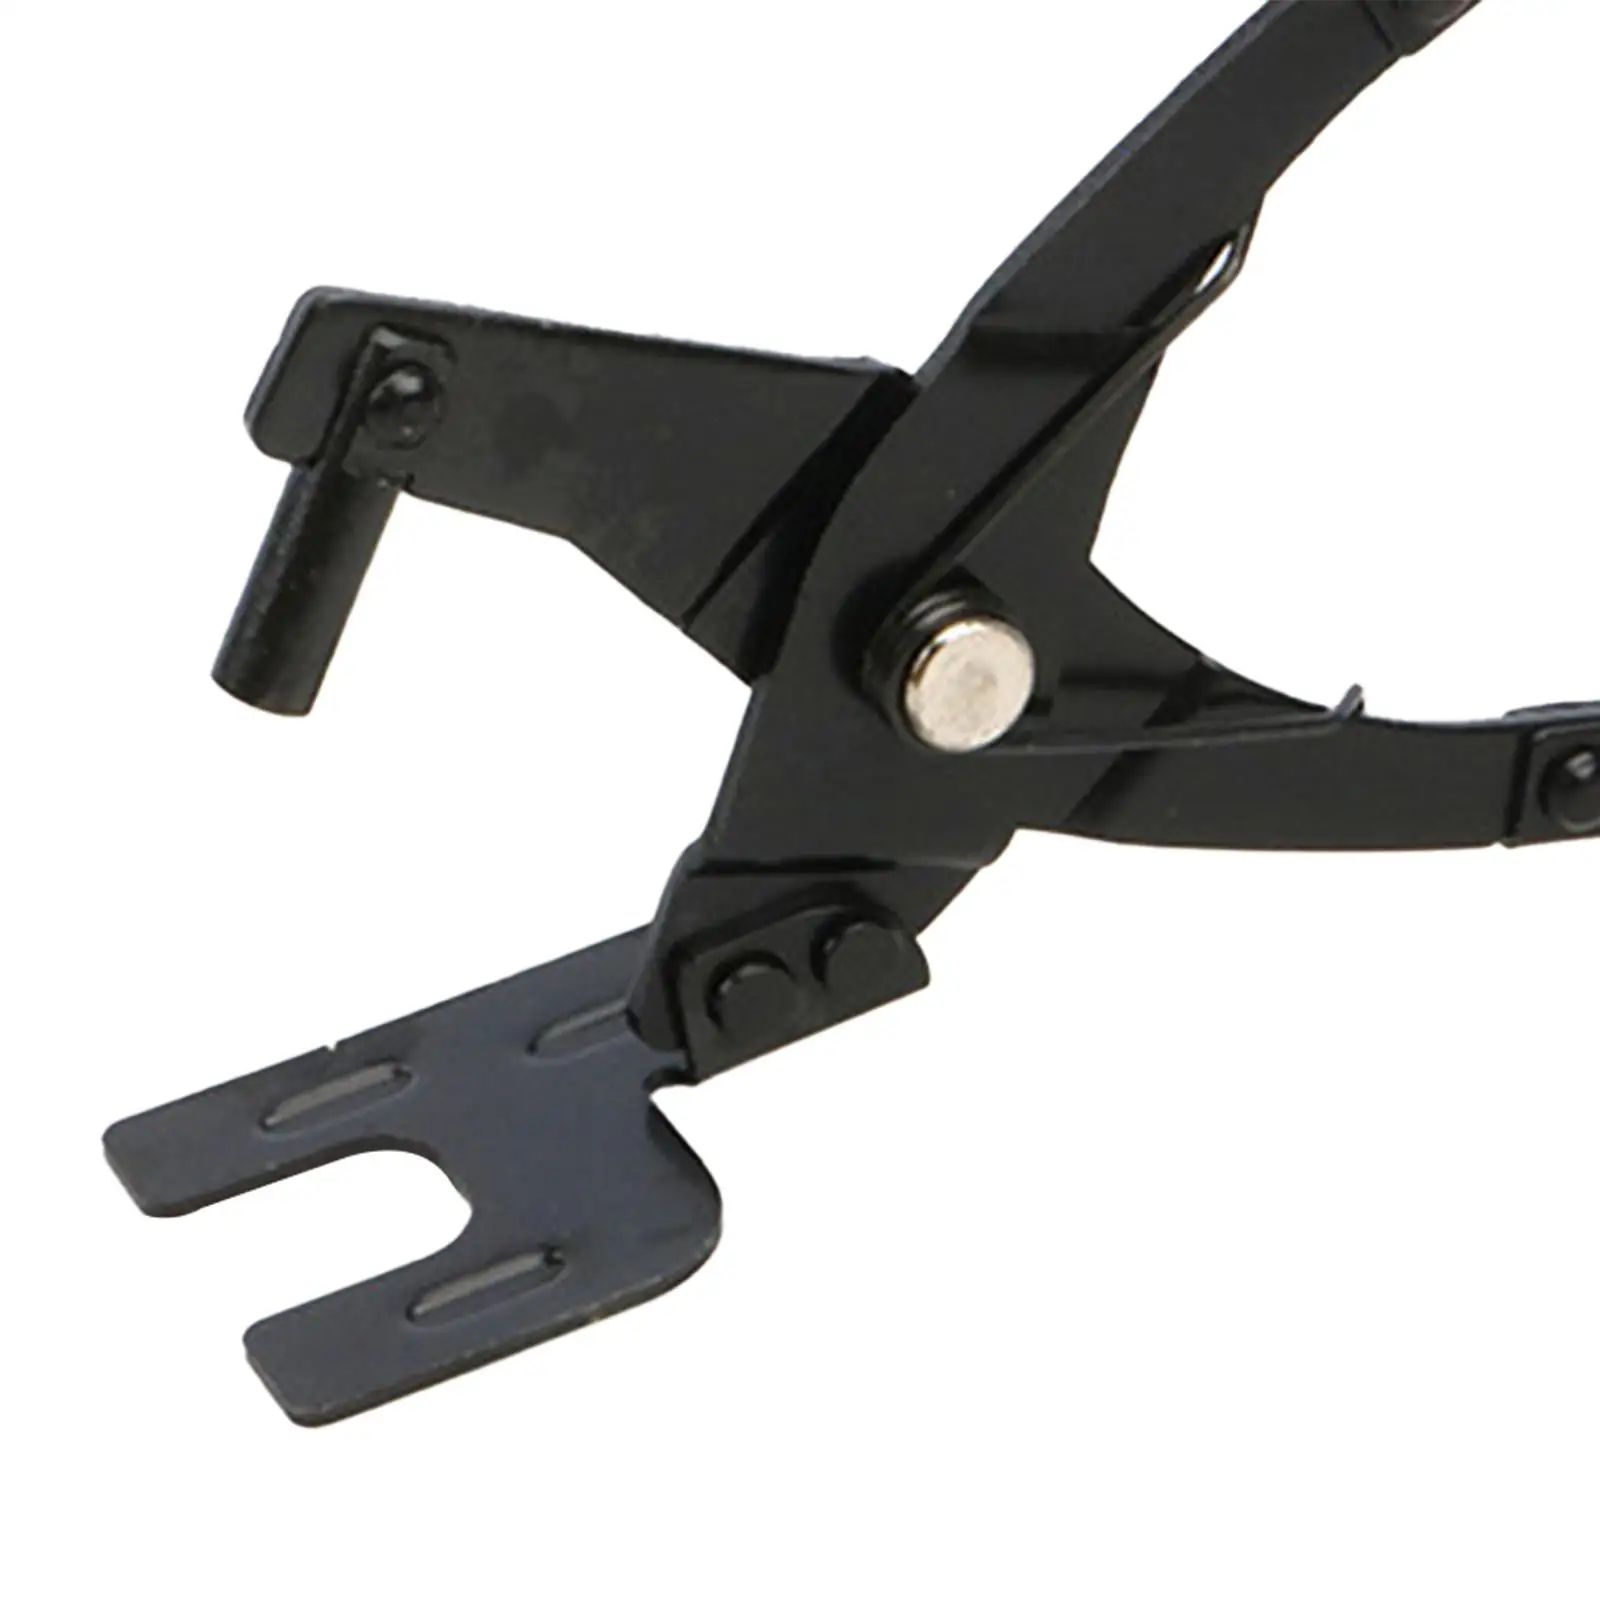 Exhaust Hanger Removal Pliers, Rubber Exhaust Hanger Removal Tool, Exhaust